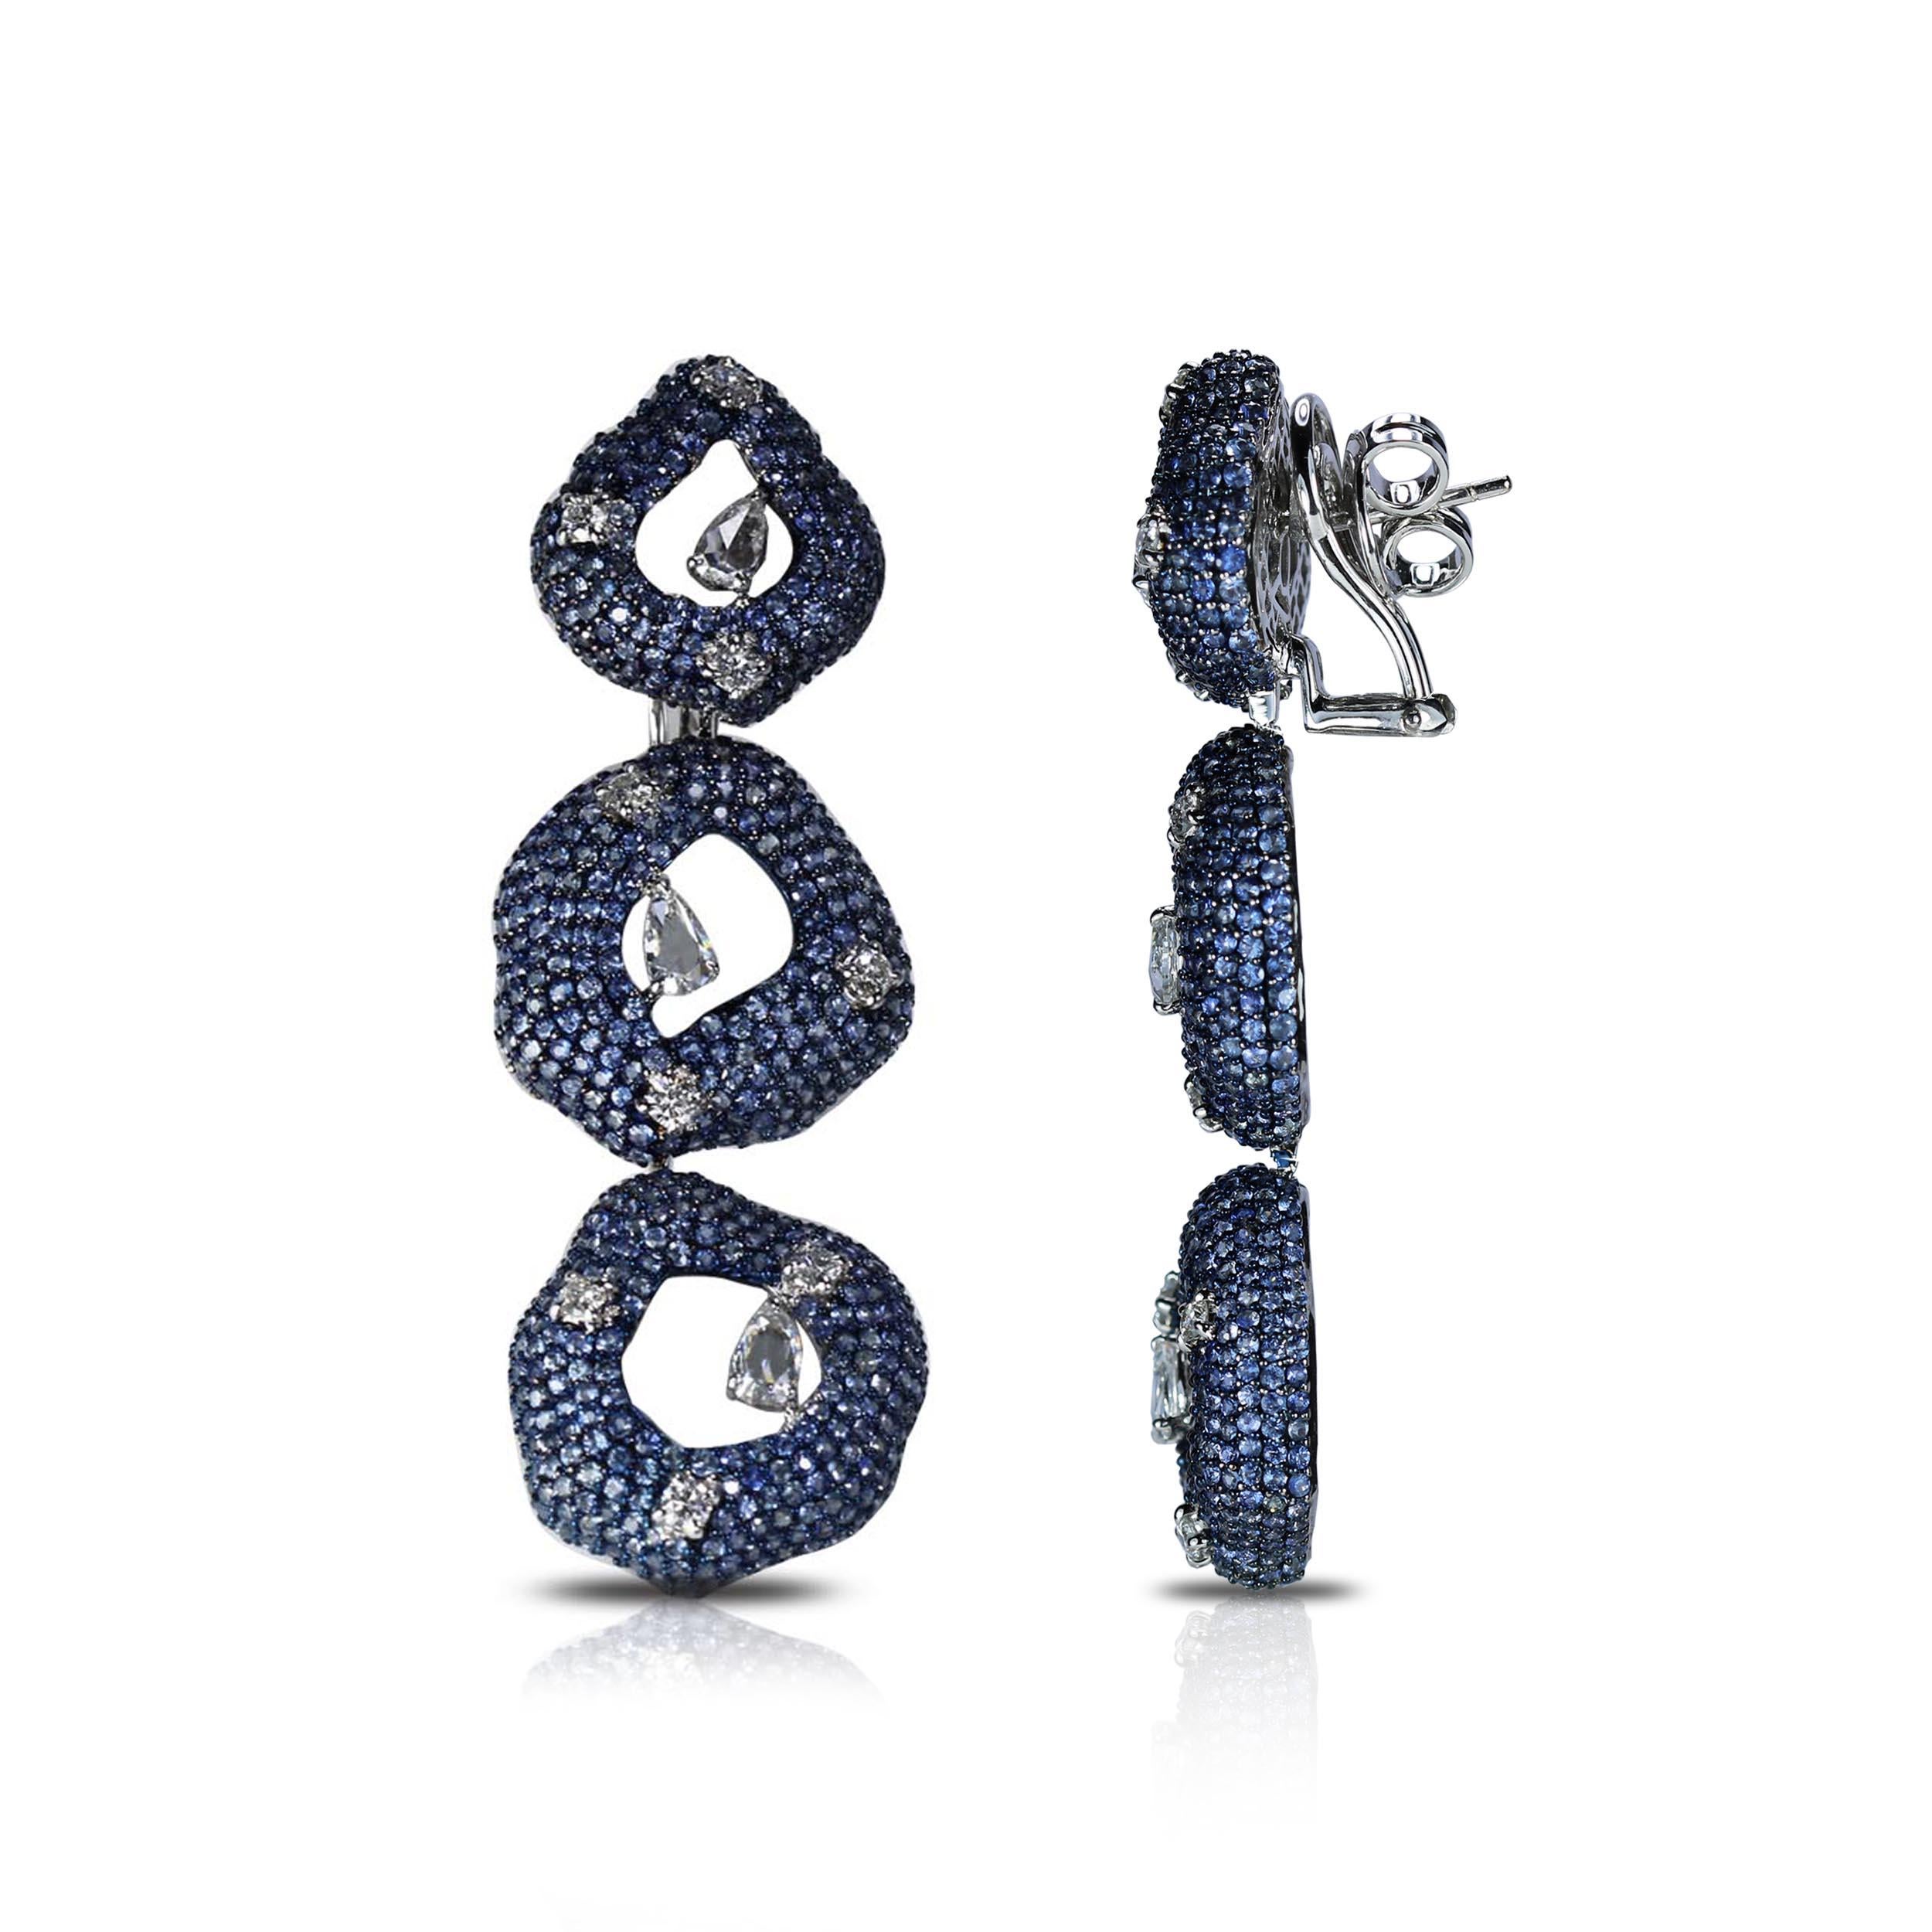 F-G/ VS Diamond and Blue Sapphire Earrings

The sheer innovativeness of this pair makes it nothing short of a piece of art. An army of blue sapphires studded in tiered anti-geometrical circles, further elevated with pear rose cut and round brilliant